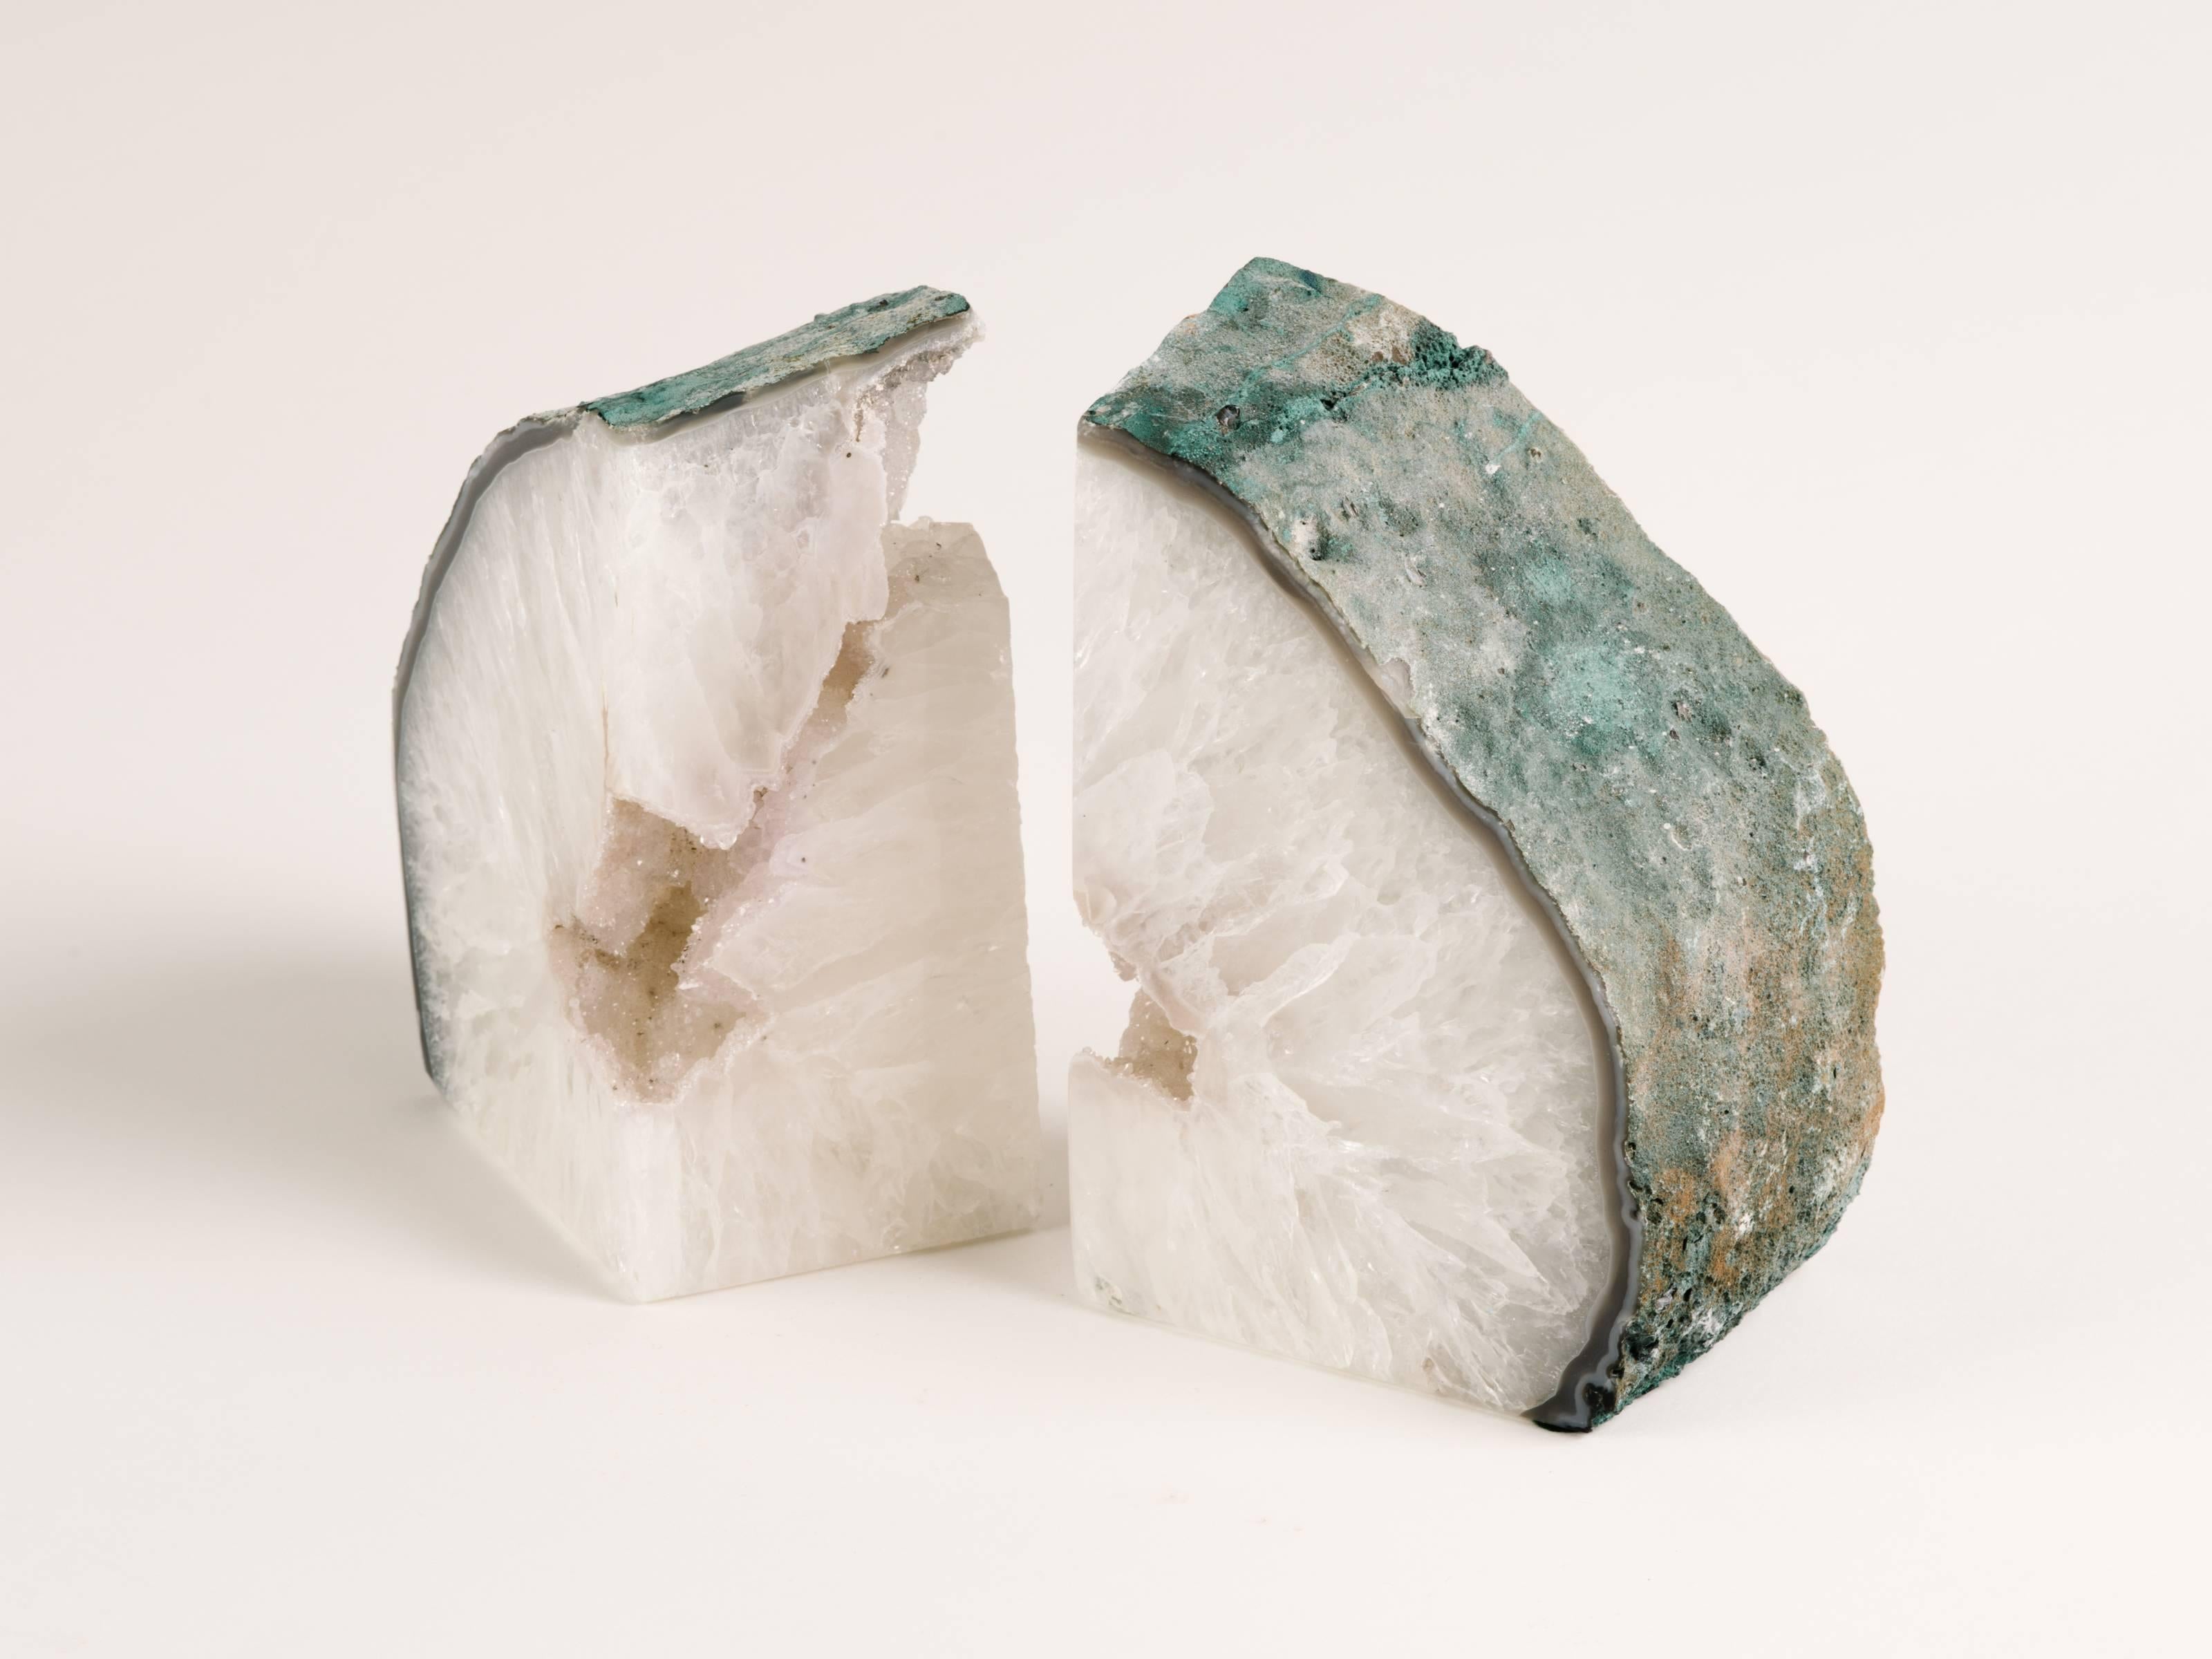 Pair of Chunky Quartz Crystal Bookends with Oxidized Green Edges 1